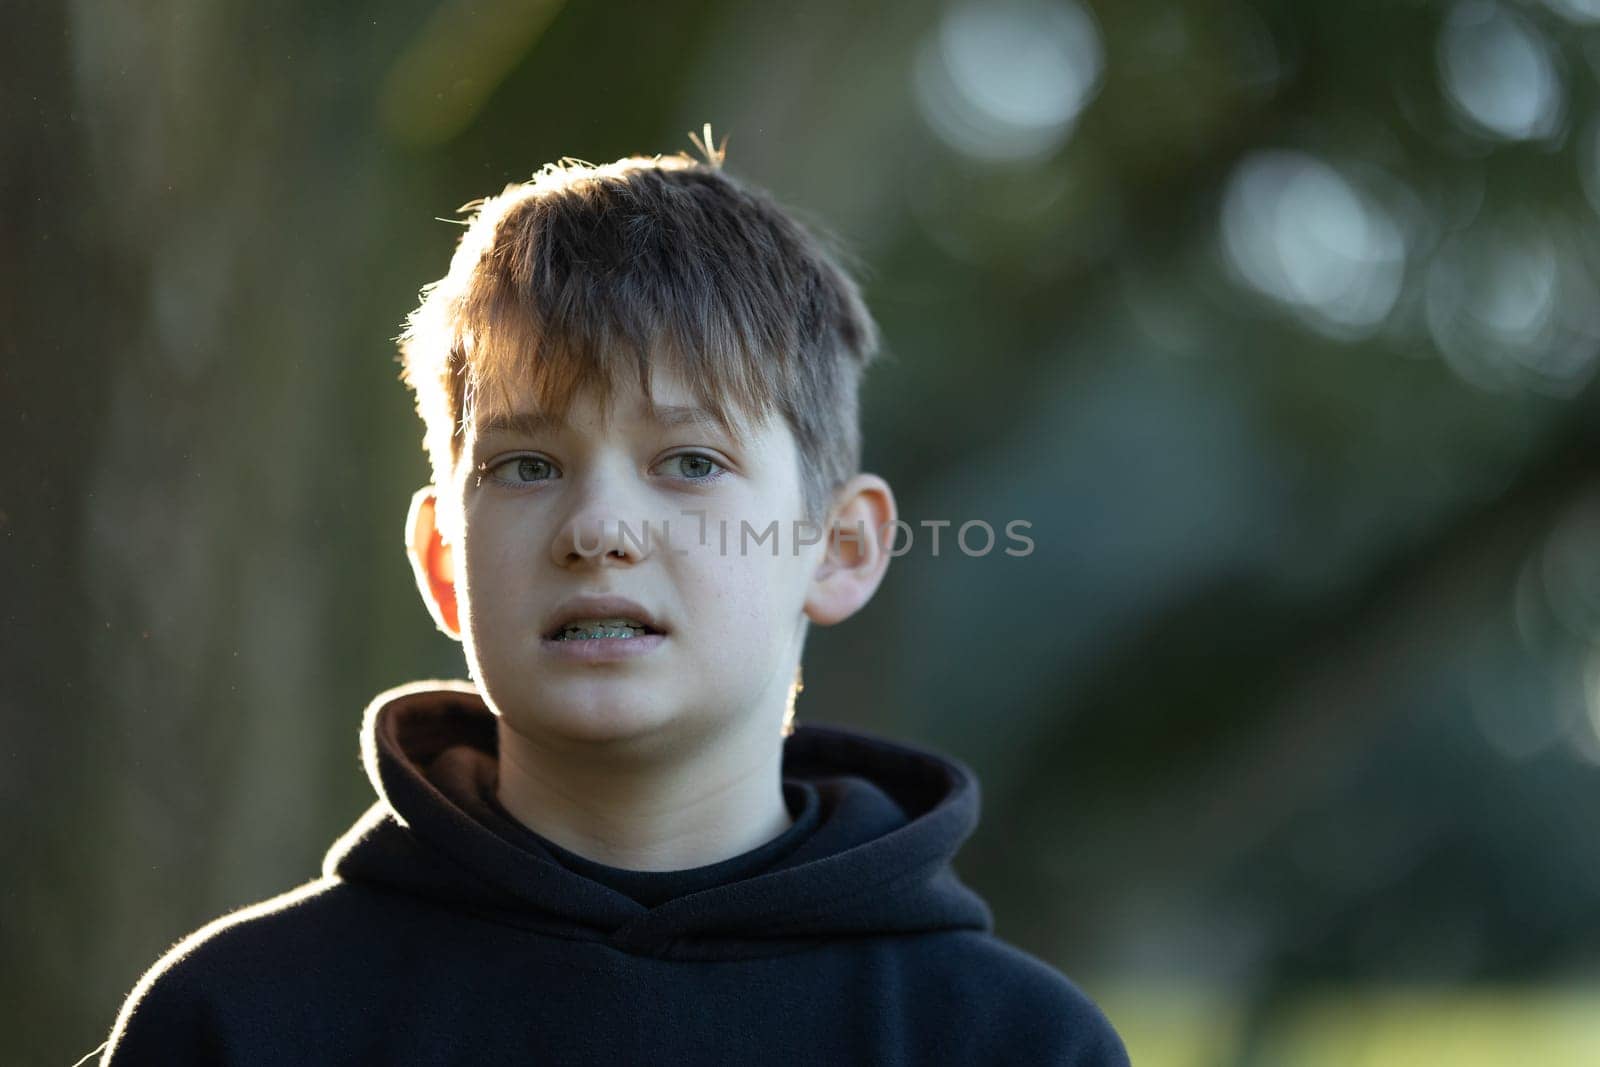 A boy with a black hoodie and a blue shirt is standing in the sun. He has a serious expression on his face